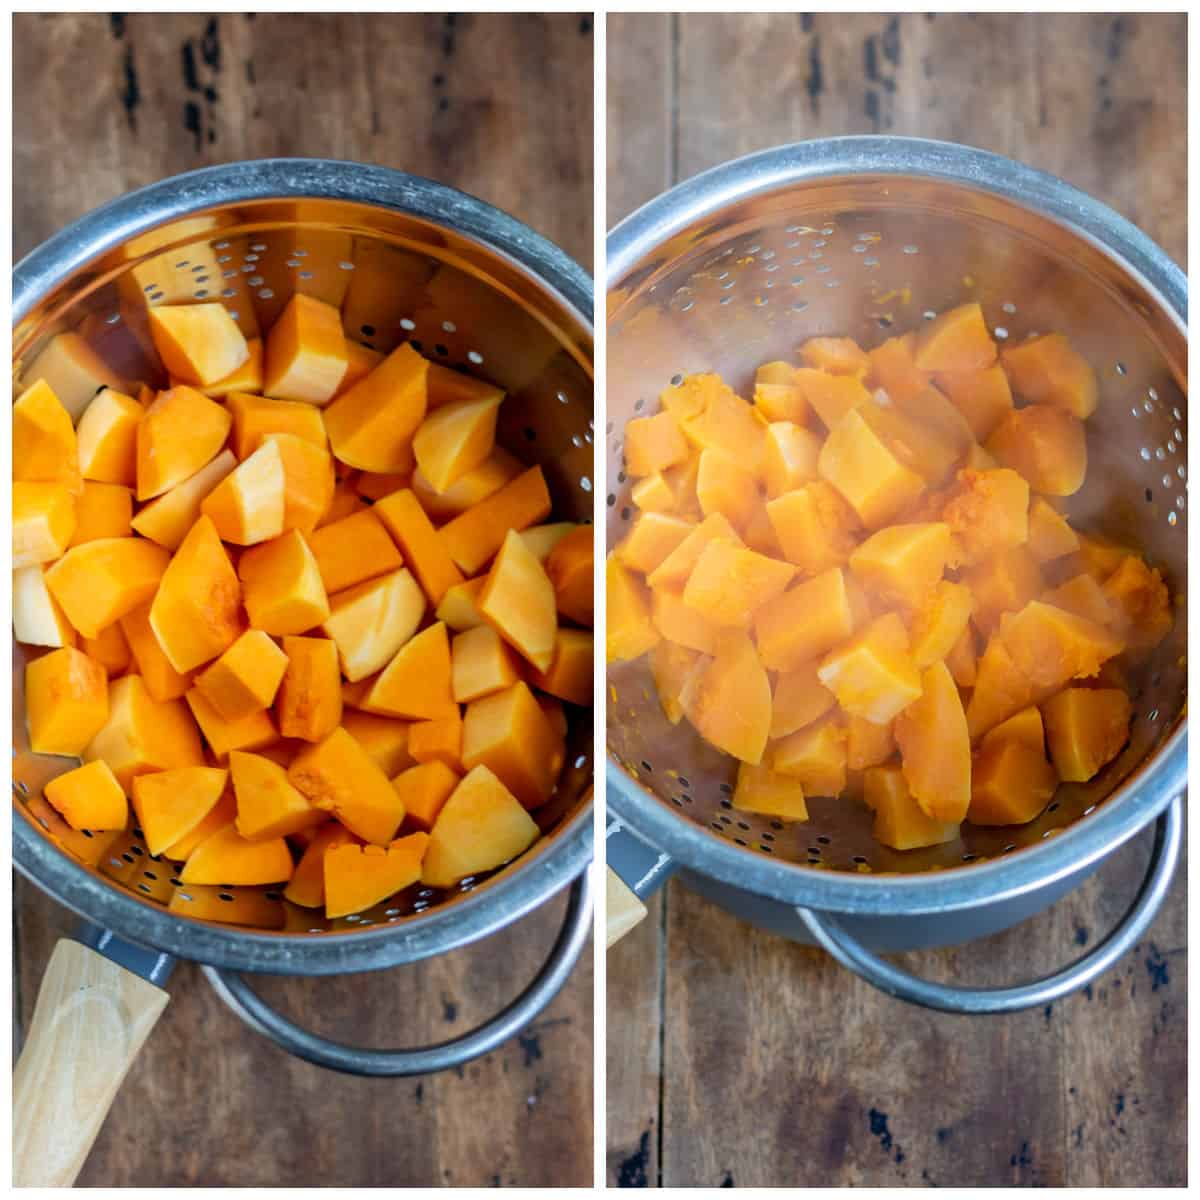 Cubes of squash in a pan, and cooked and drained.